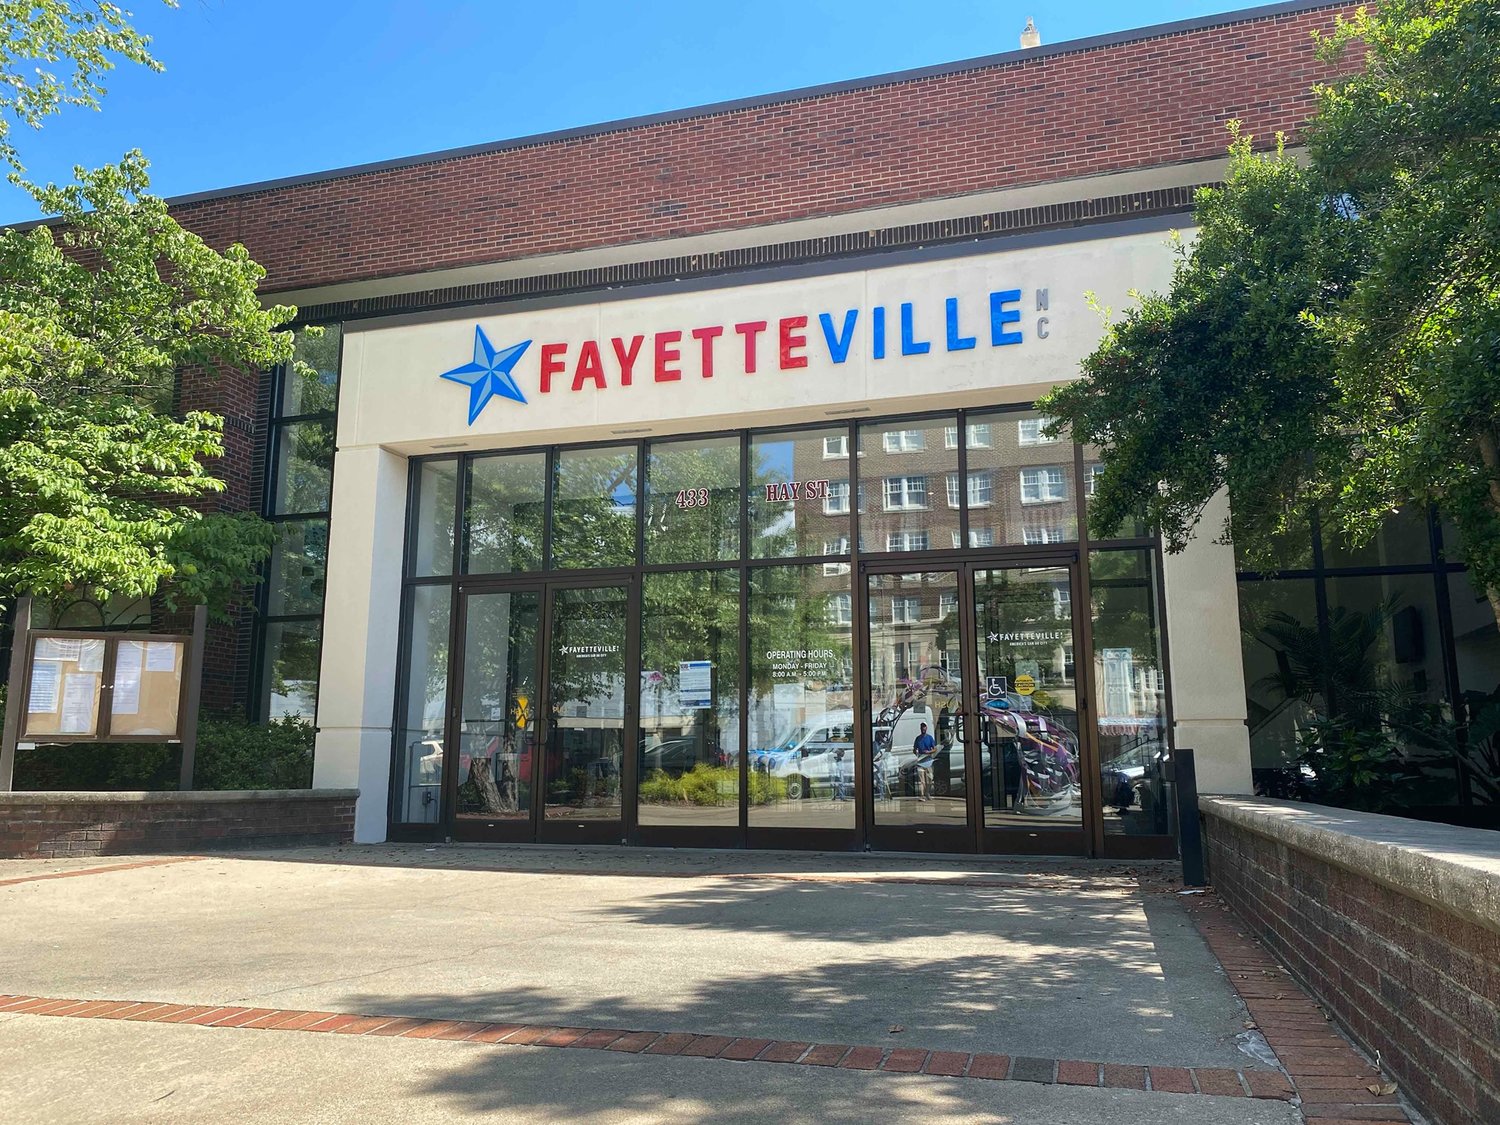 The Fayetteville City Council is expected to get an update on its strategic plan when it meets Monday.